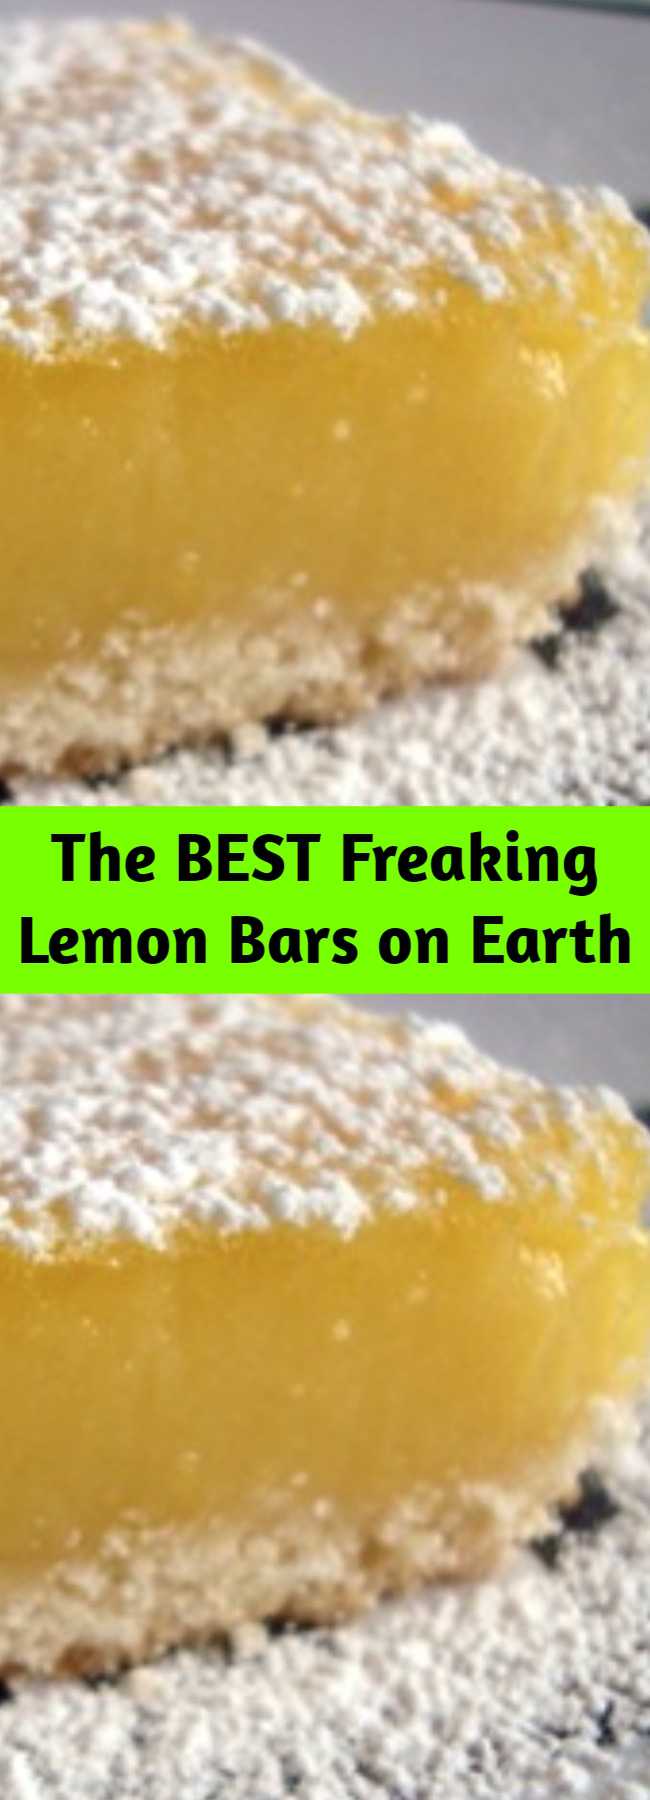 The BEST Freaking Lemon Bars on Earth - You think I’m kidding? You will never, ever, buy the ready-to-make box of pseudo-lemon bars again. This one is the be all and end all. This one is The BEST Freaking Lemon Bars on Earth!